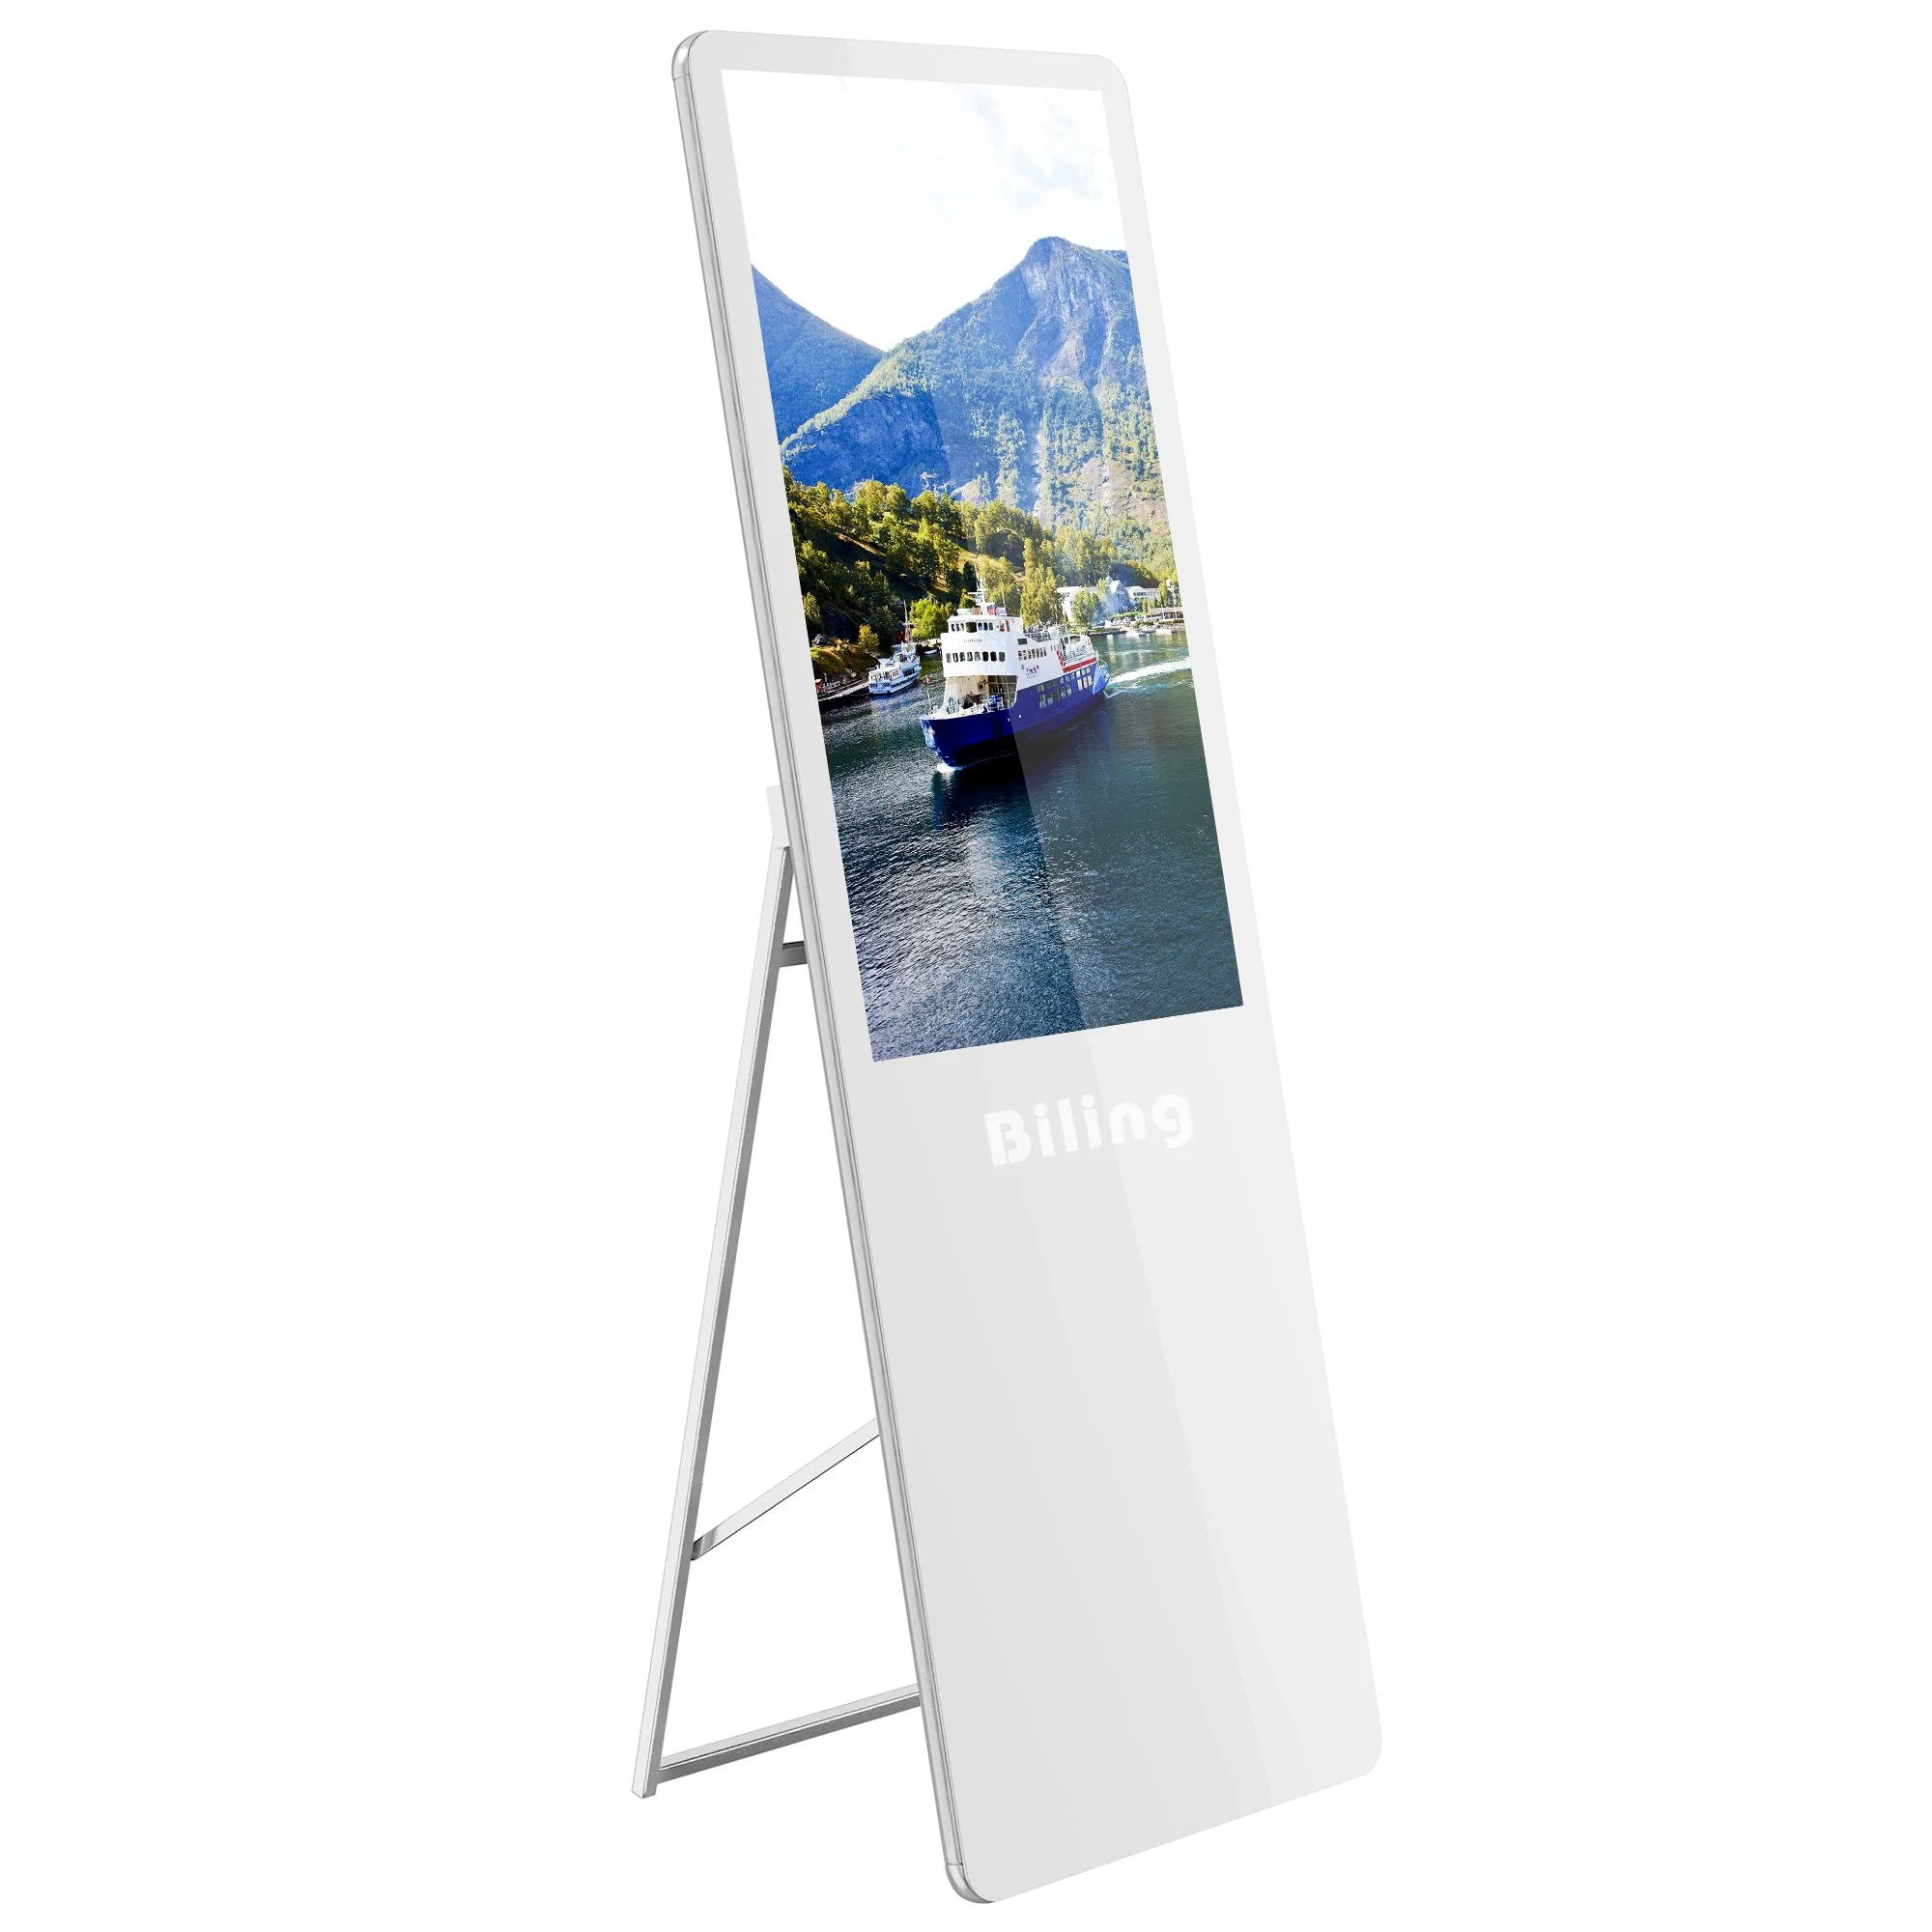 Portable LCD Digital Signage 43 Inch Floor Stand LCD Panel Video Wall LCD Digital Signage Outdoor LCD Advertising Display Model Houses Ad Player